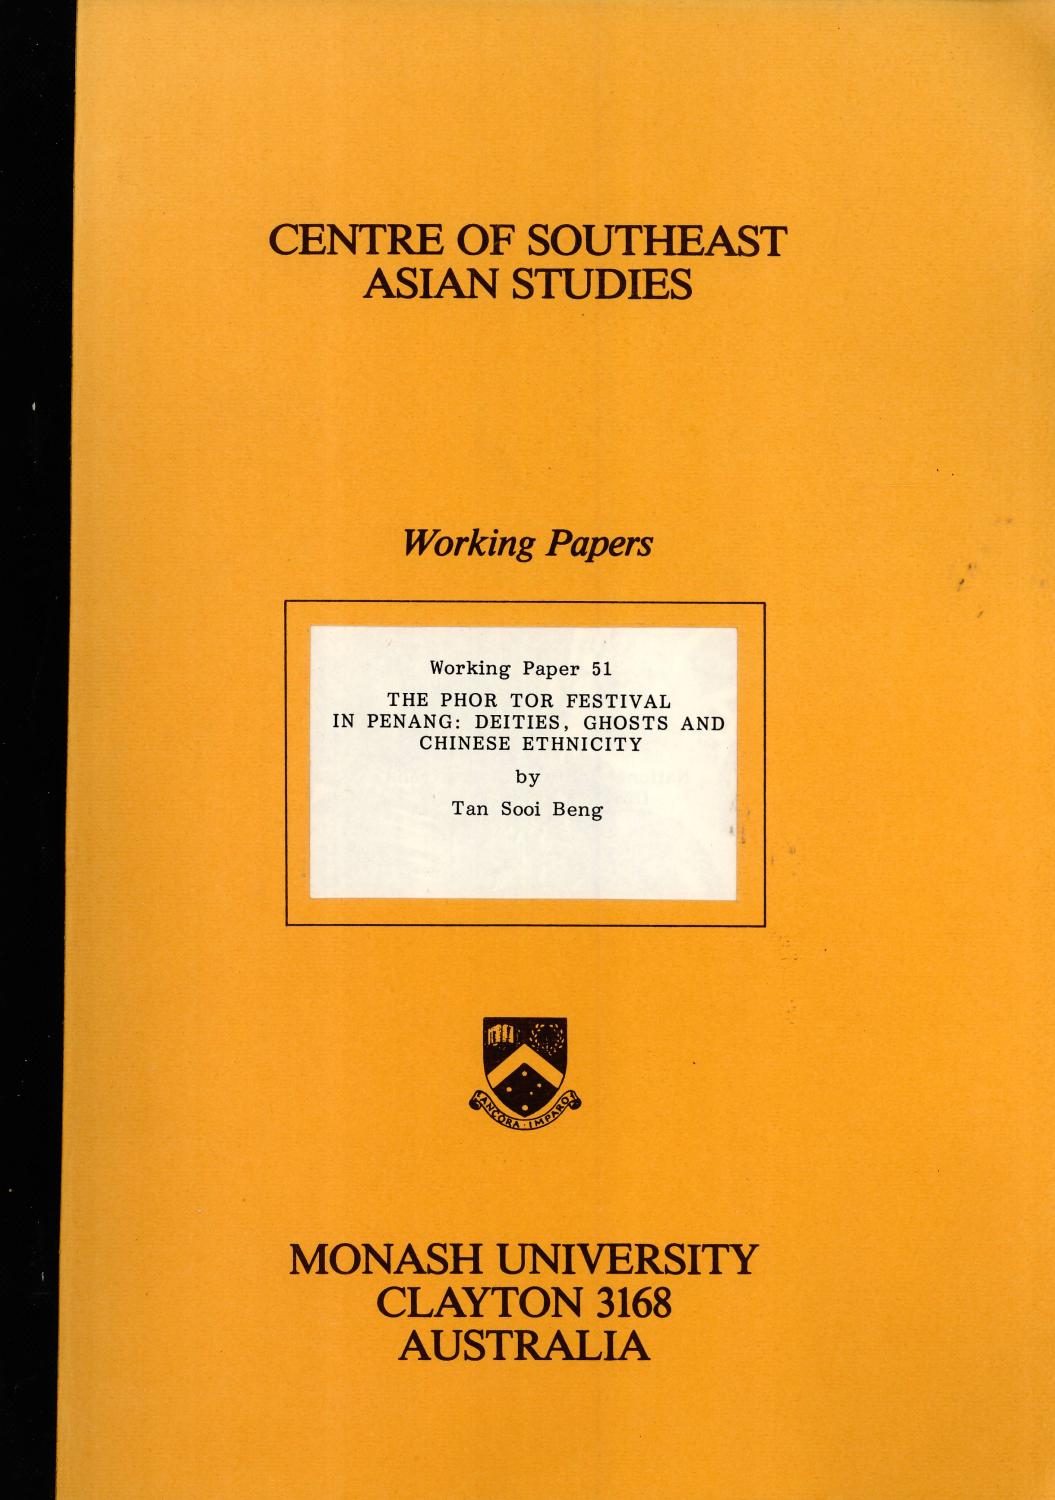 The Phor Tor Festival In Penang: Deities, Ghosts and Chinese Ethnicity (Working papers / Centre of Southeast Asian Studies, Monash University) - Tan Sooi Beng